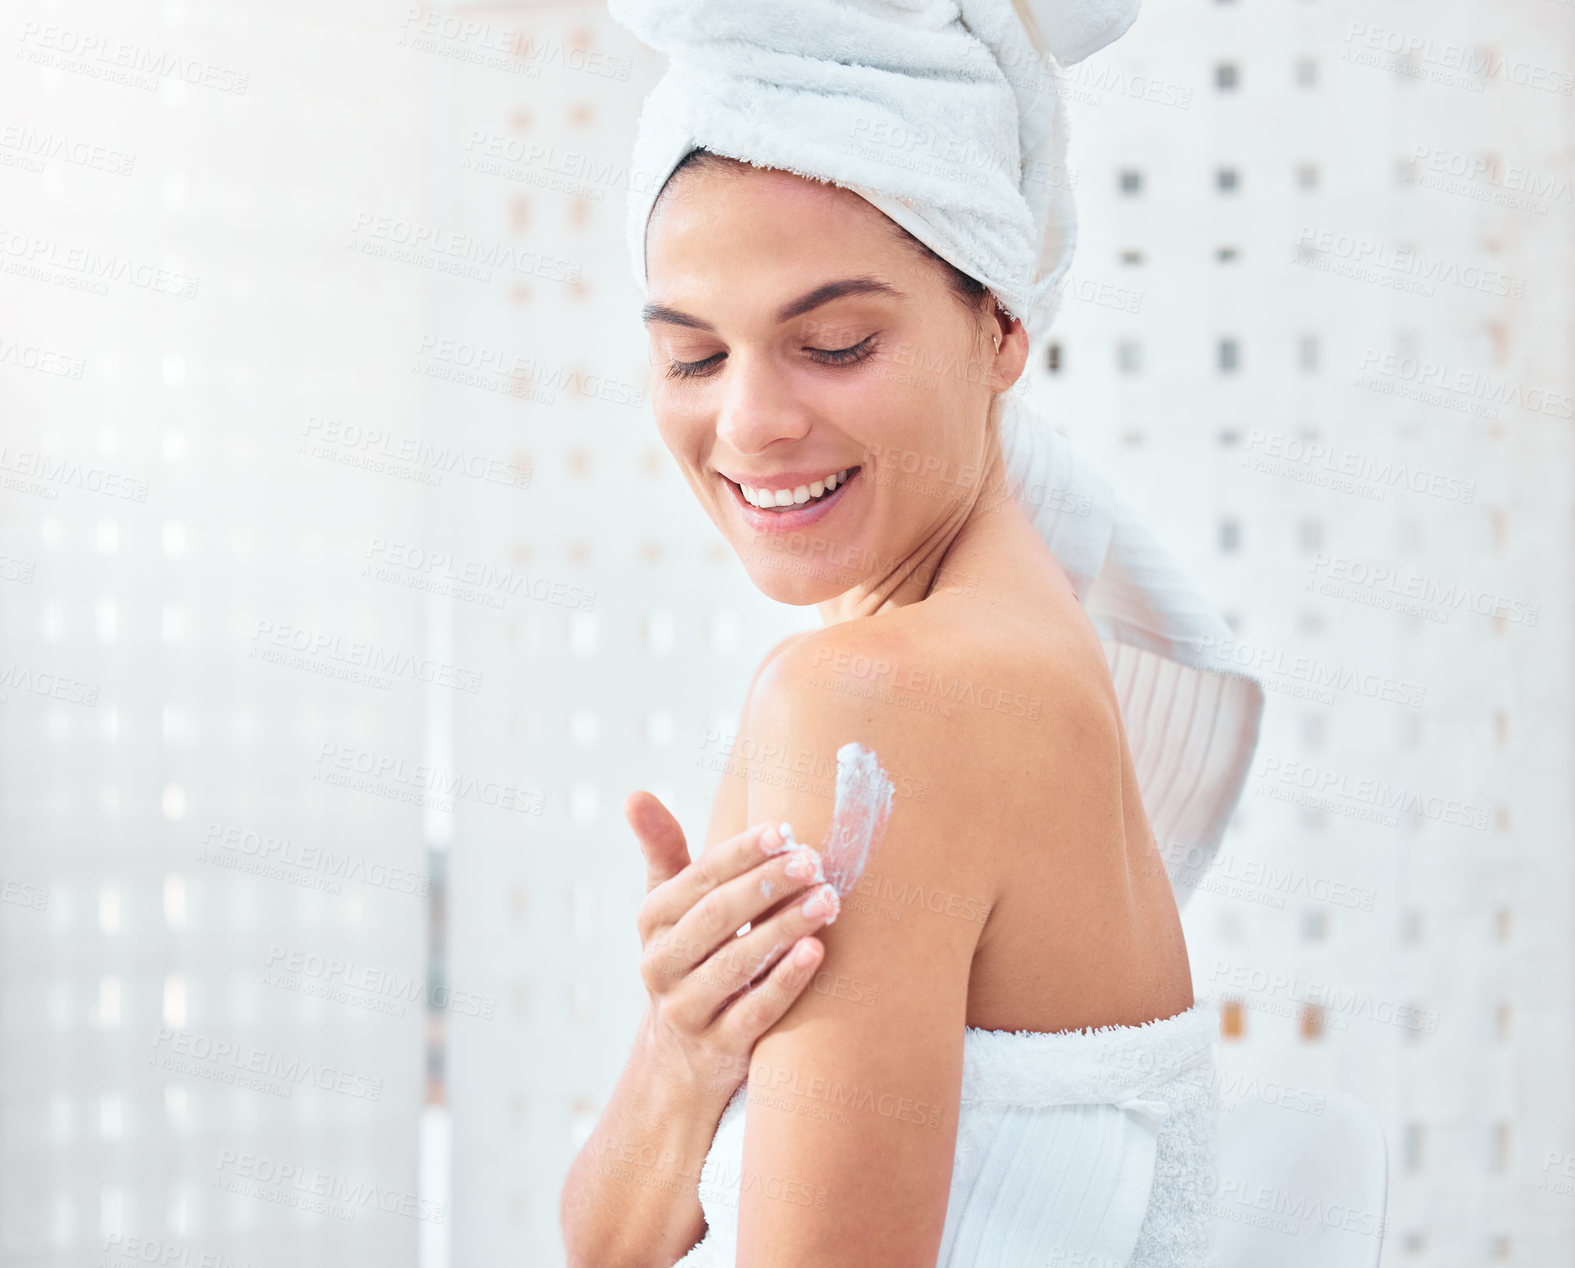 Buy stock photo Shot of a woman applying moisturiser to her arms and shoulders